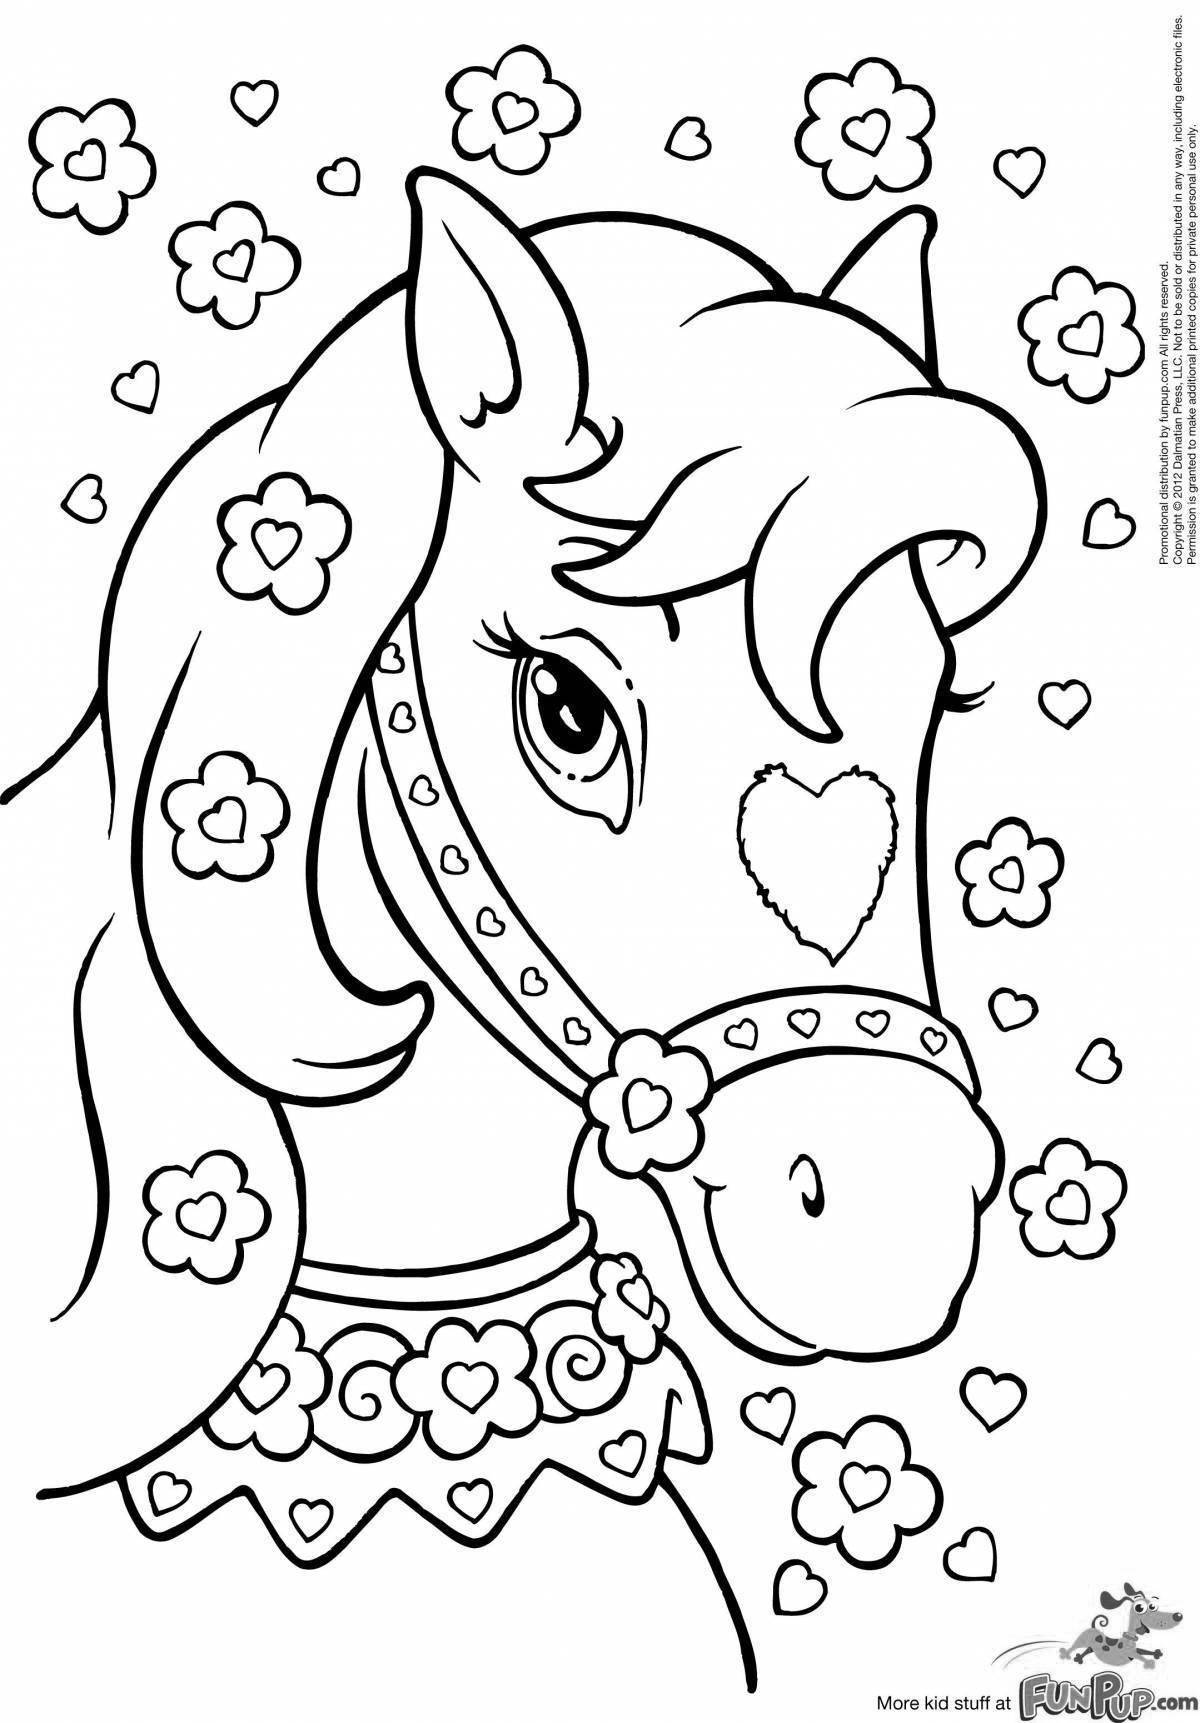 Fairytale coloring book for girls 5-7 years old